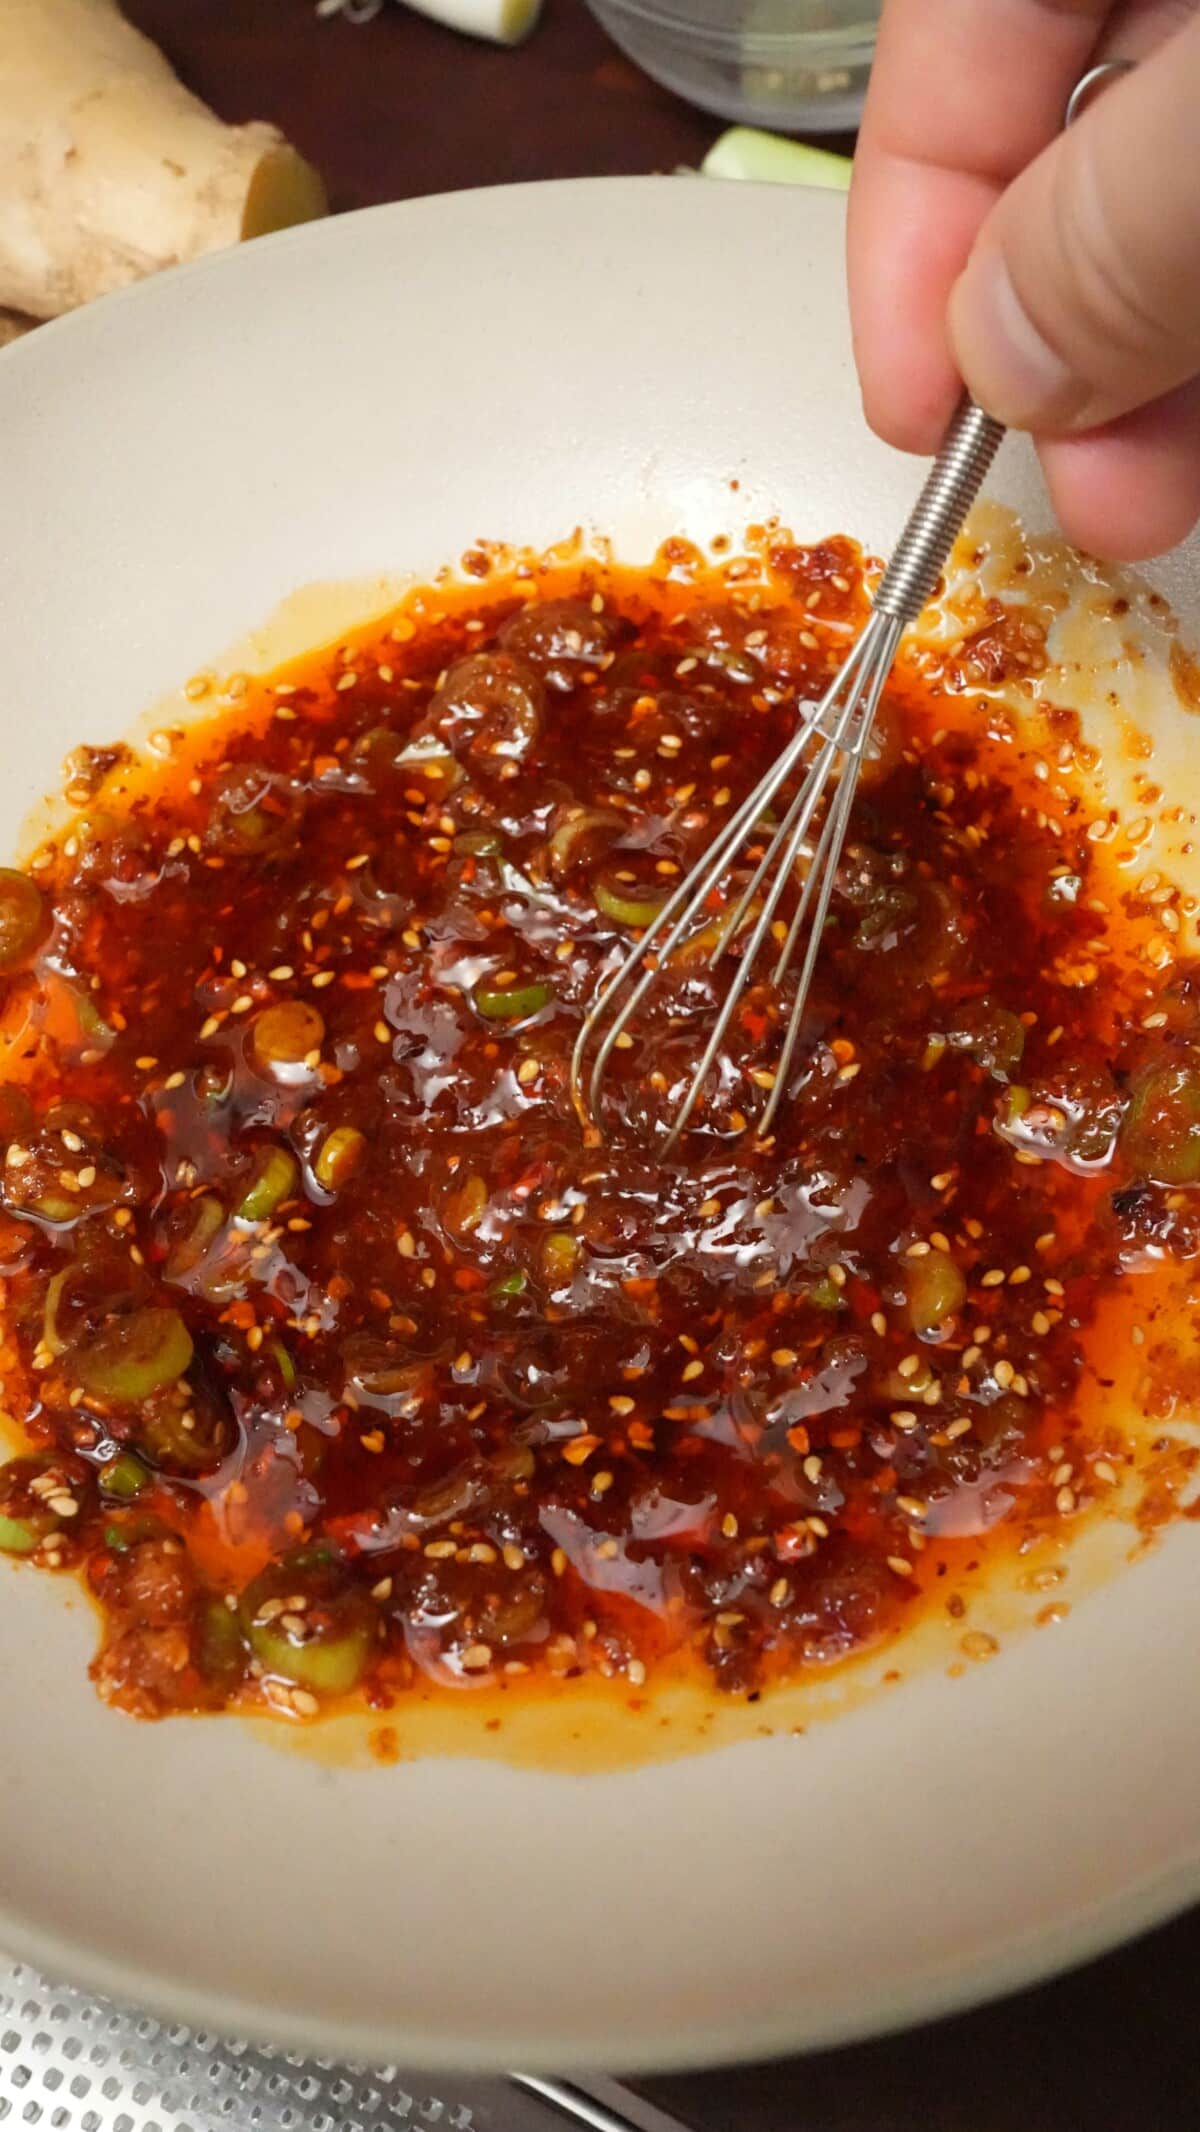 Hot oil being mixed with chili flakes and aromatics in a ceramic bowl with a small whisk.